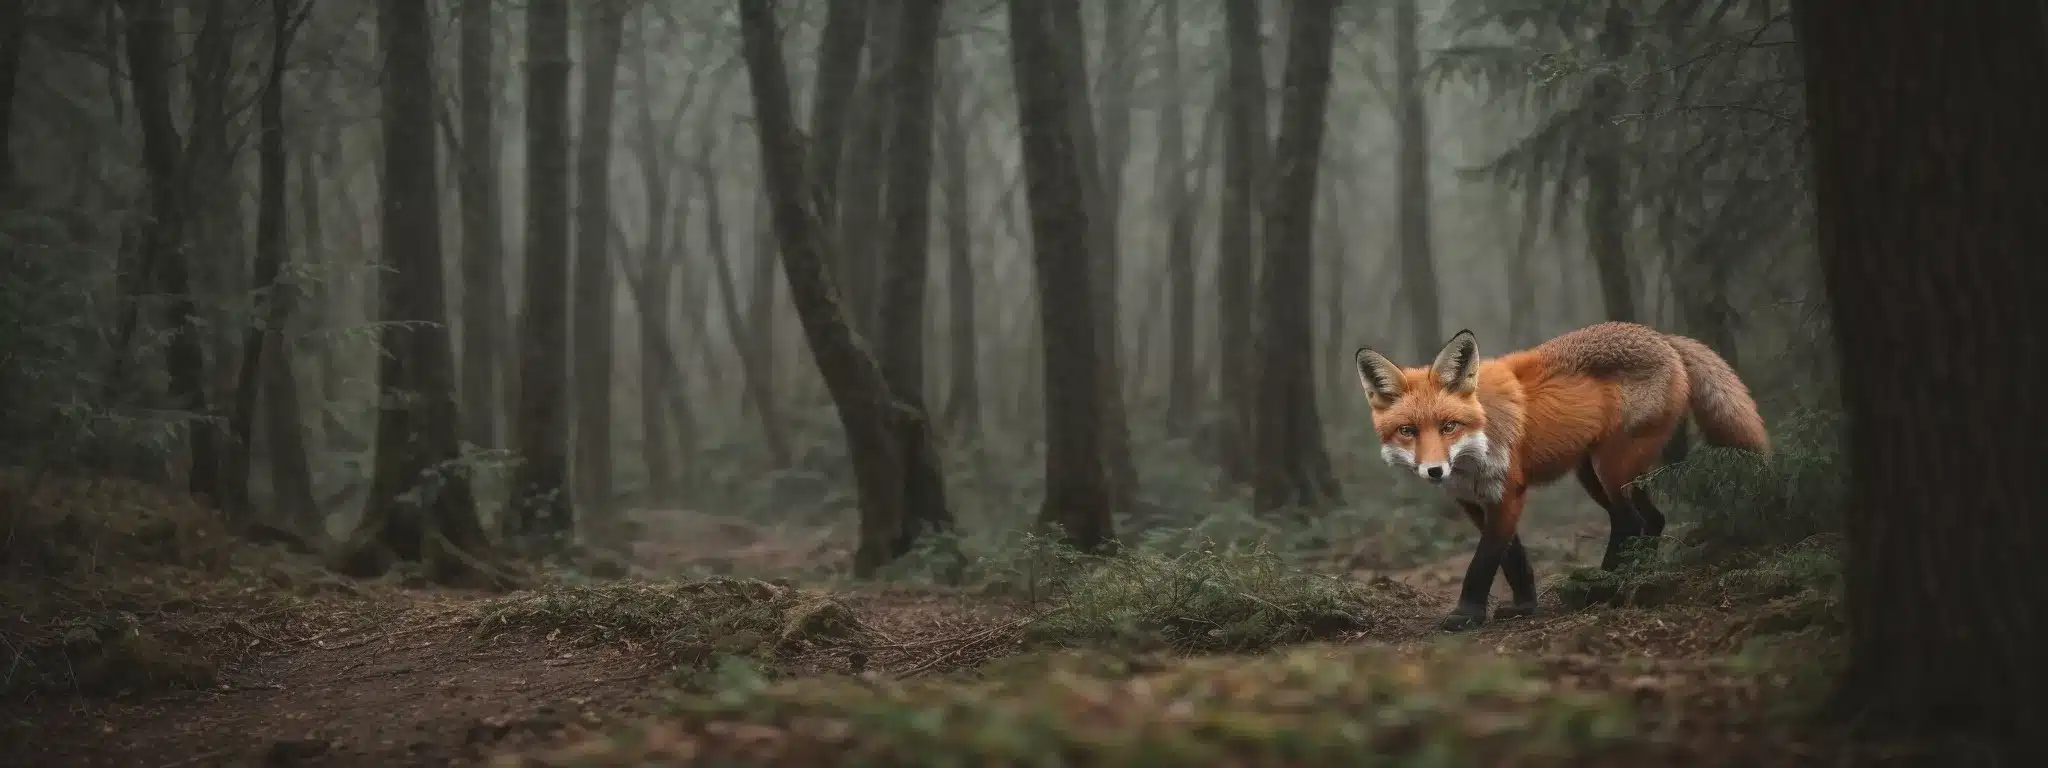 A Fox Stealthily Navigates Through A Dense Forest, Alert And Poised.